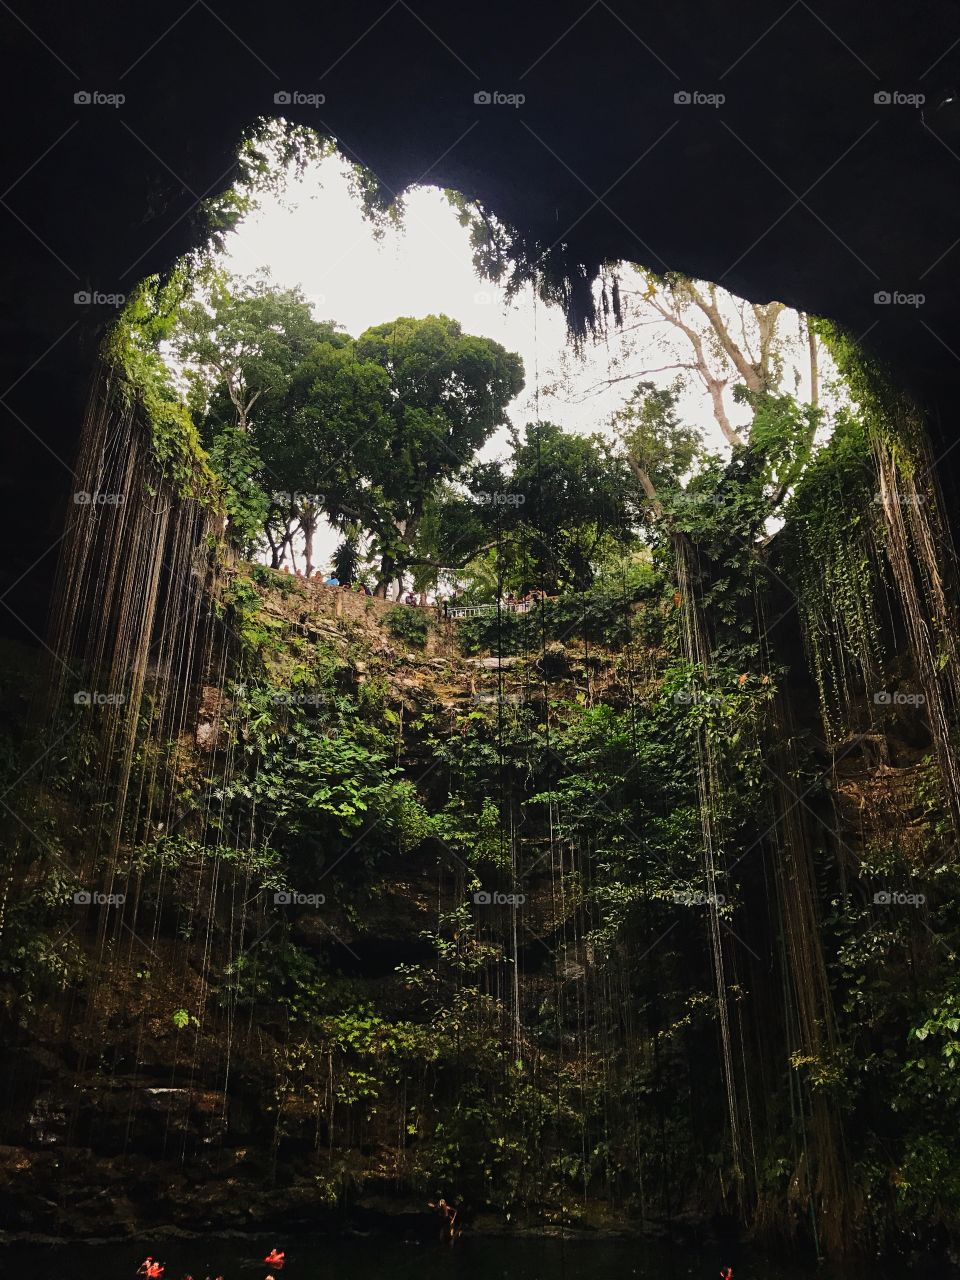 Cenote in Mexico with amazing vegetation